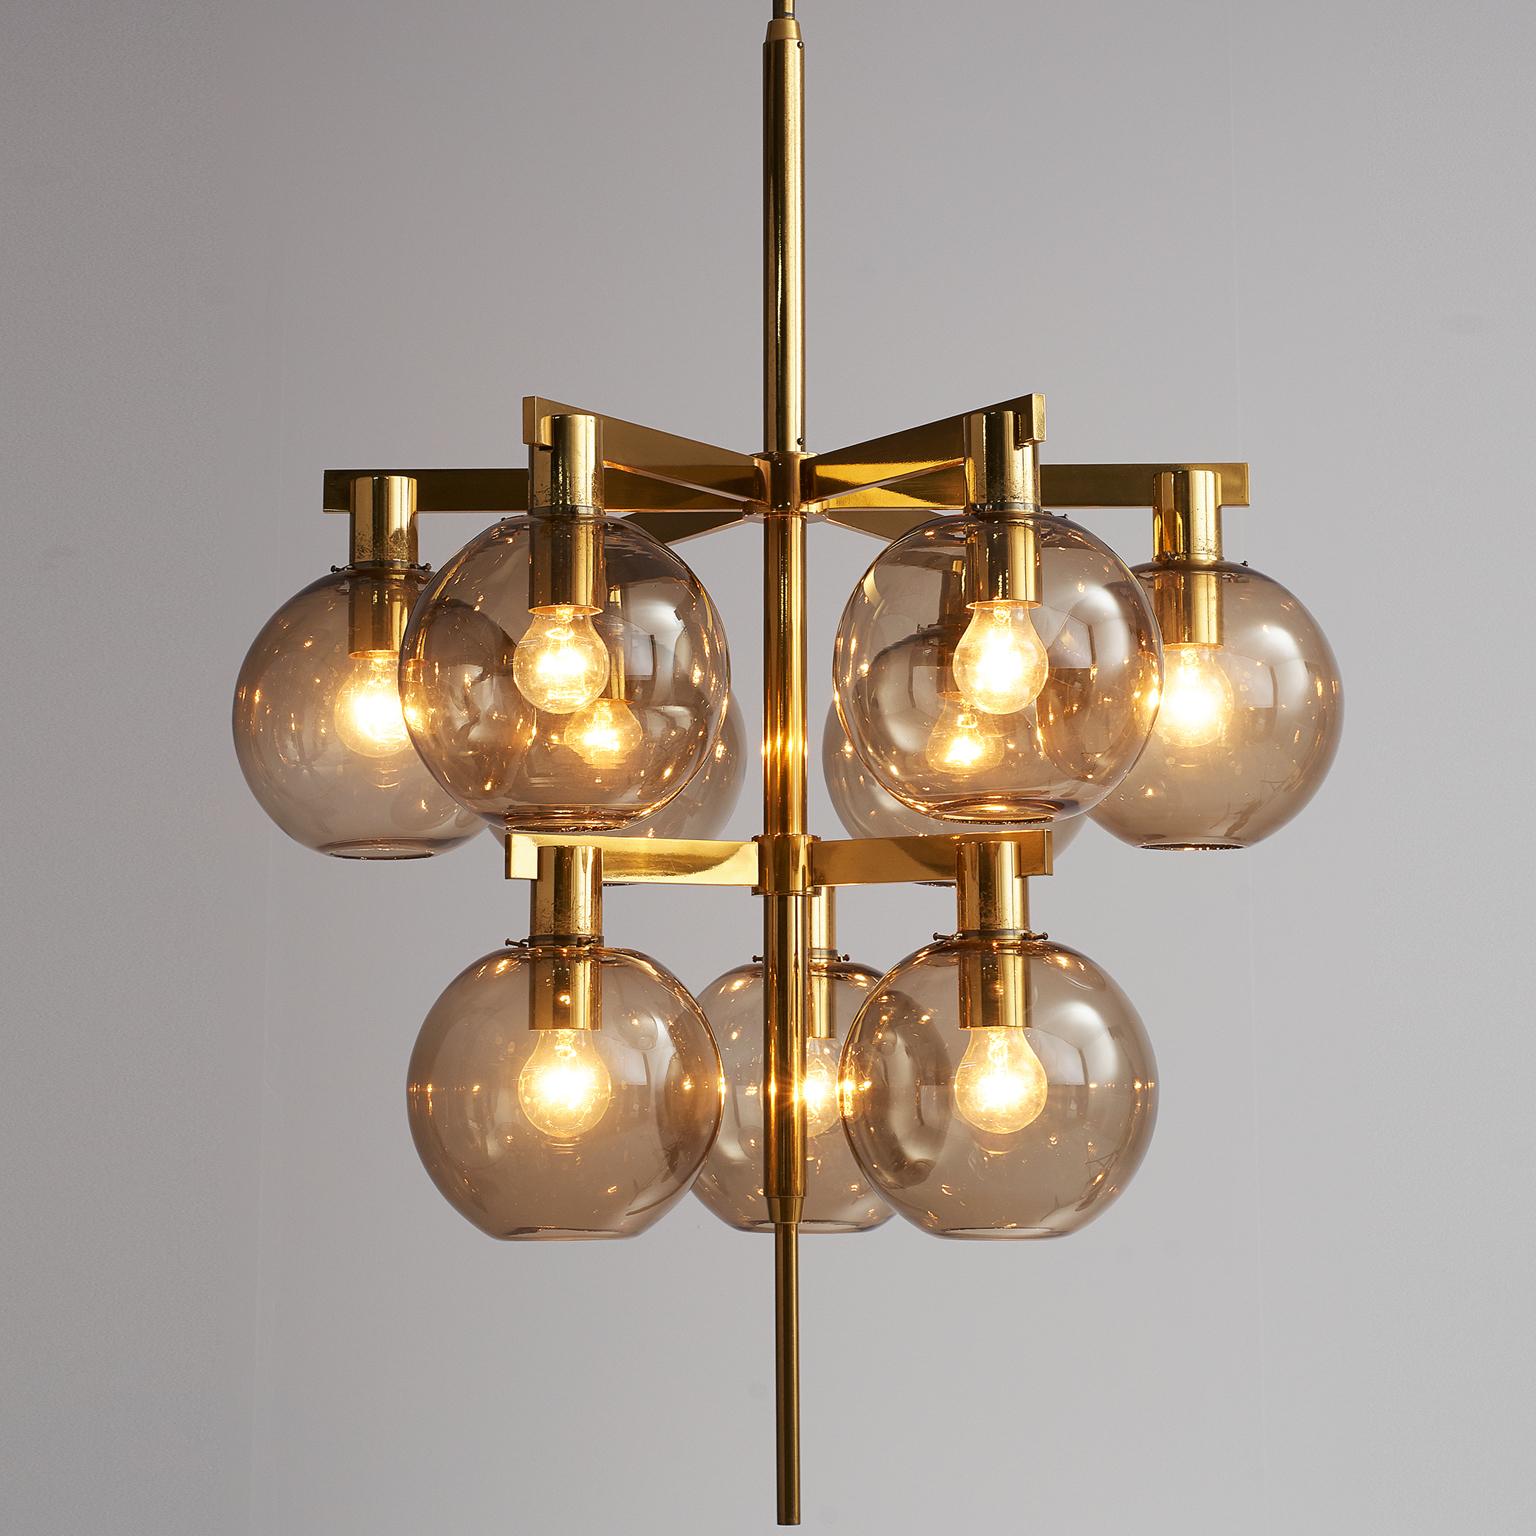 Hans-Agne Jakobsson, ceiling lamp model T-348/6 'Pastoral', brass and glass, Sweden. 

This chandelier is designed by Hans-Agne Jakobsson. The chandelier is produced by Hans-Agne Jakobsson AB in Markaryd, Sweden. The brass frame has nine brass